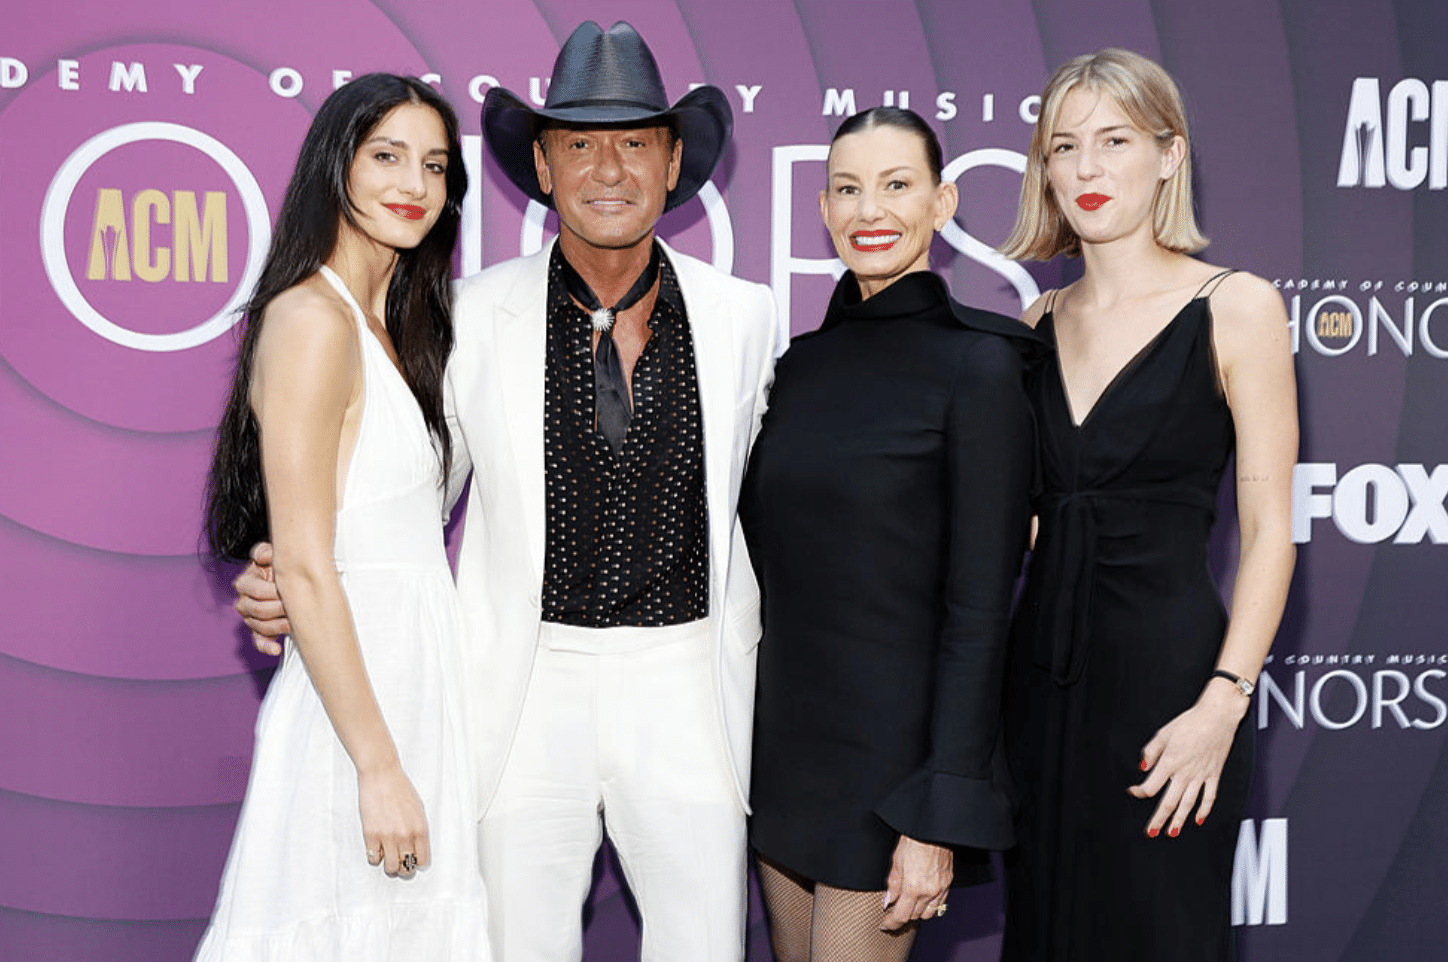 Tim McGraw poses with Faith Hill and daughters, Maggie and Audrey, ahead of ACM Honors.